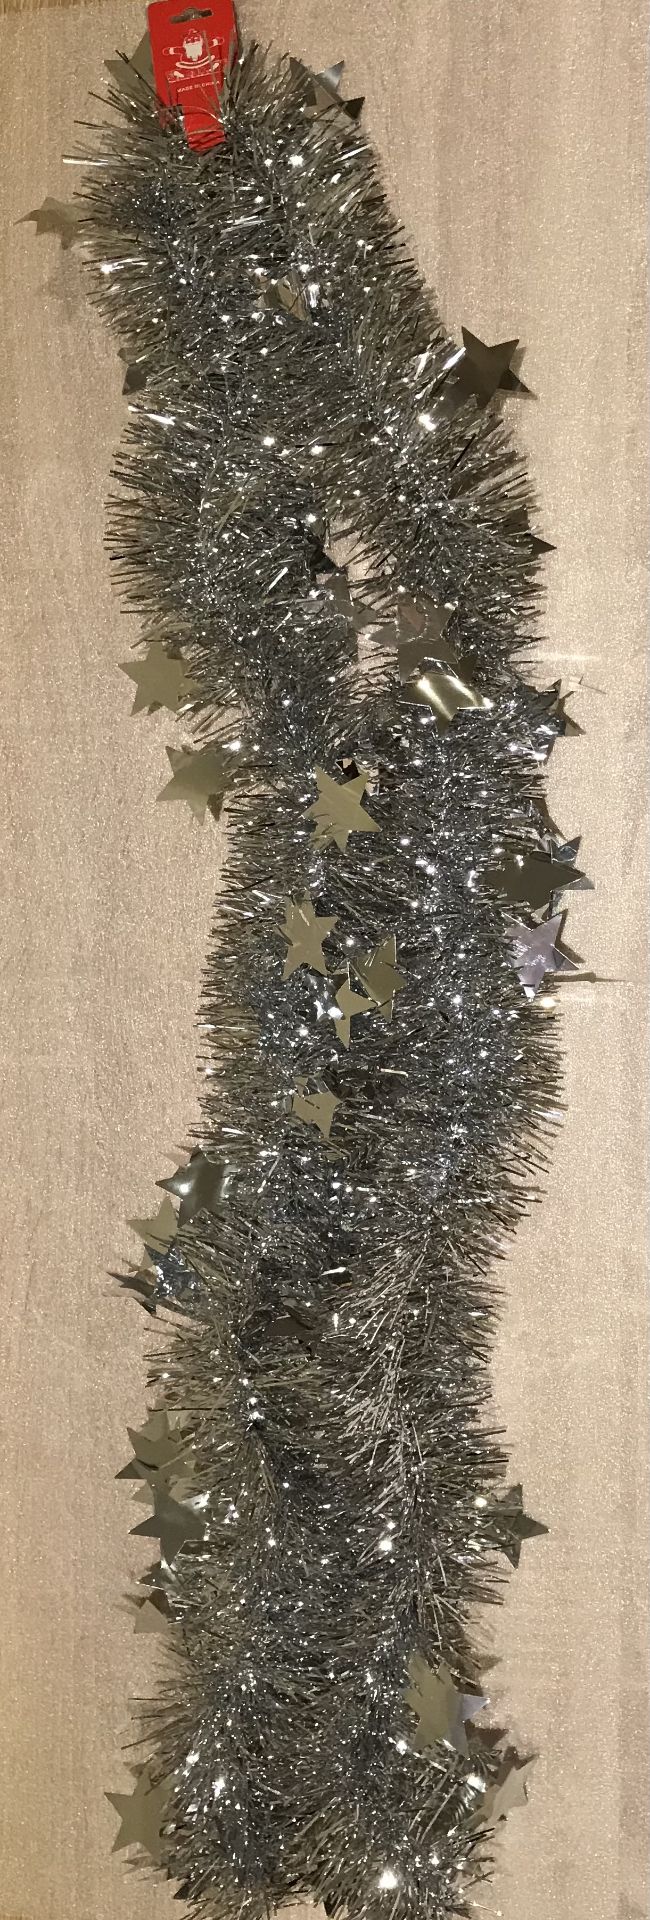 500 X Tinsel With Stars 1.8M Long 5 Colours Gold, Silver, Red, Blue, Green - Image 6 of 6